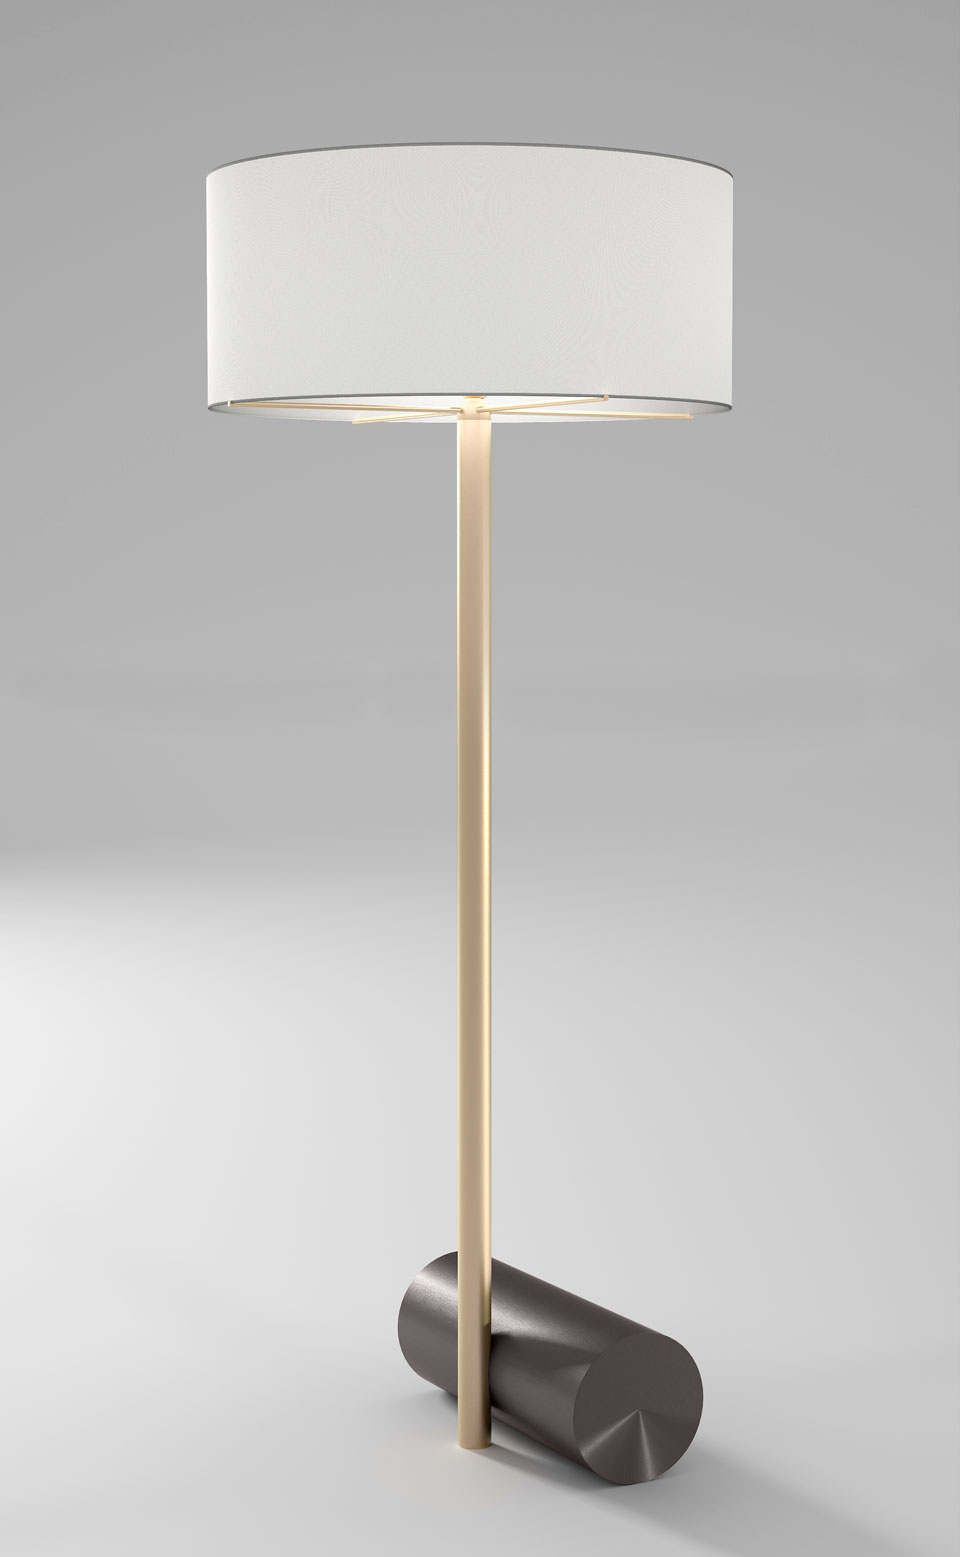 Cale Floor Lamp Graphite Base Satin Brass Foot And Cylindrical Shade In White Percaline Dimmer throughout proportions 960 X 1557